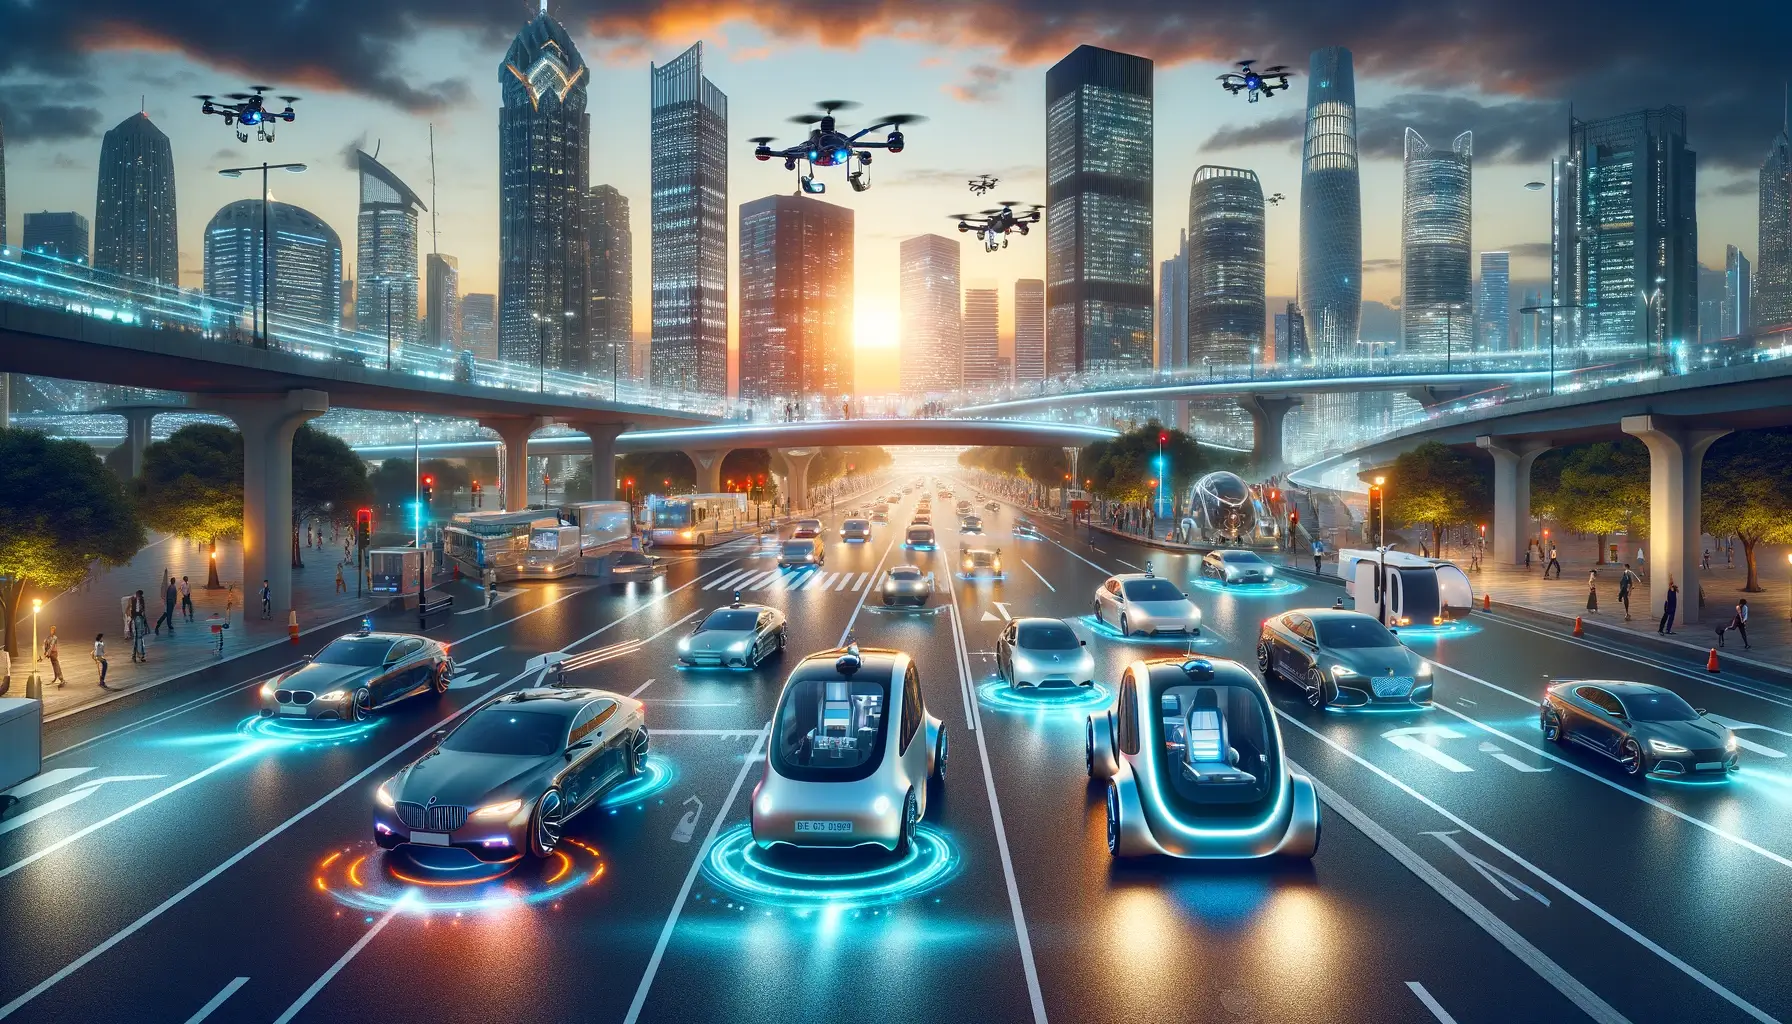 Futuristic cityscape at dusk with various autonomous vehicles and drones, showcasing illuminated smart technology on the streets and the seamless flow of traffic against a backdrop of modern skyscrapers.